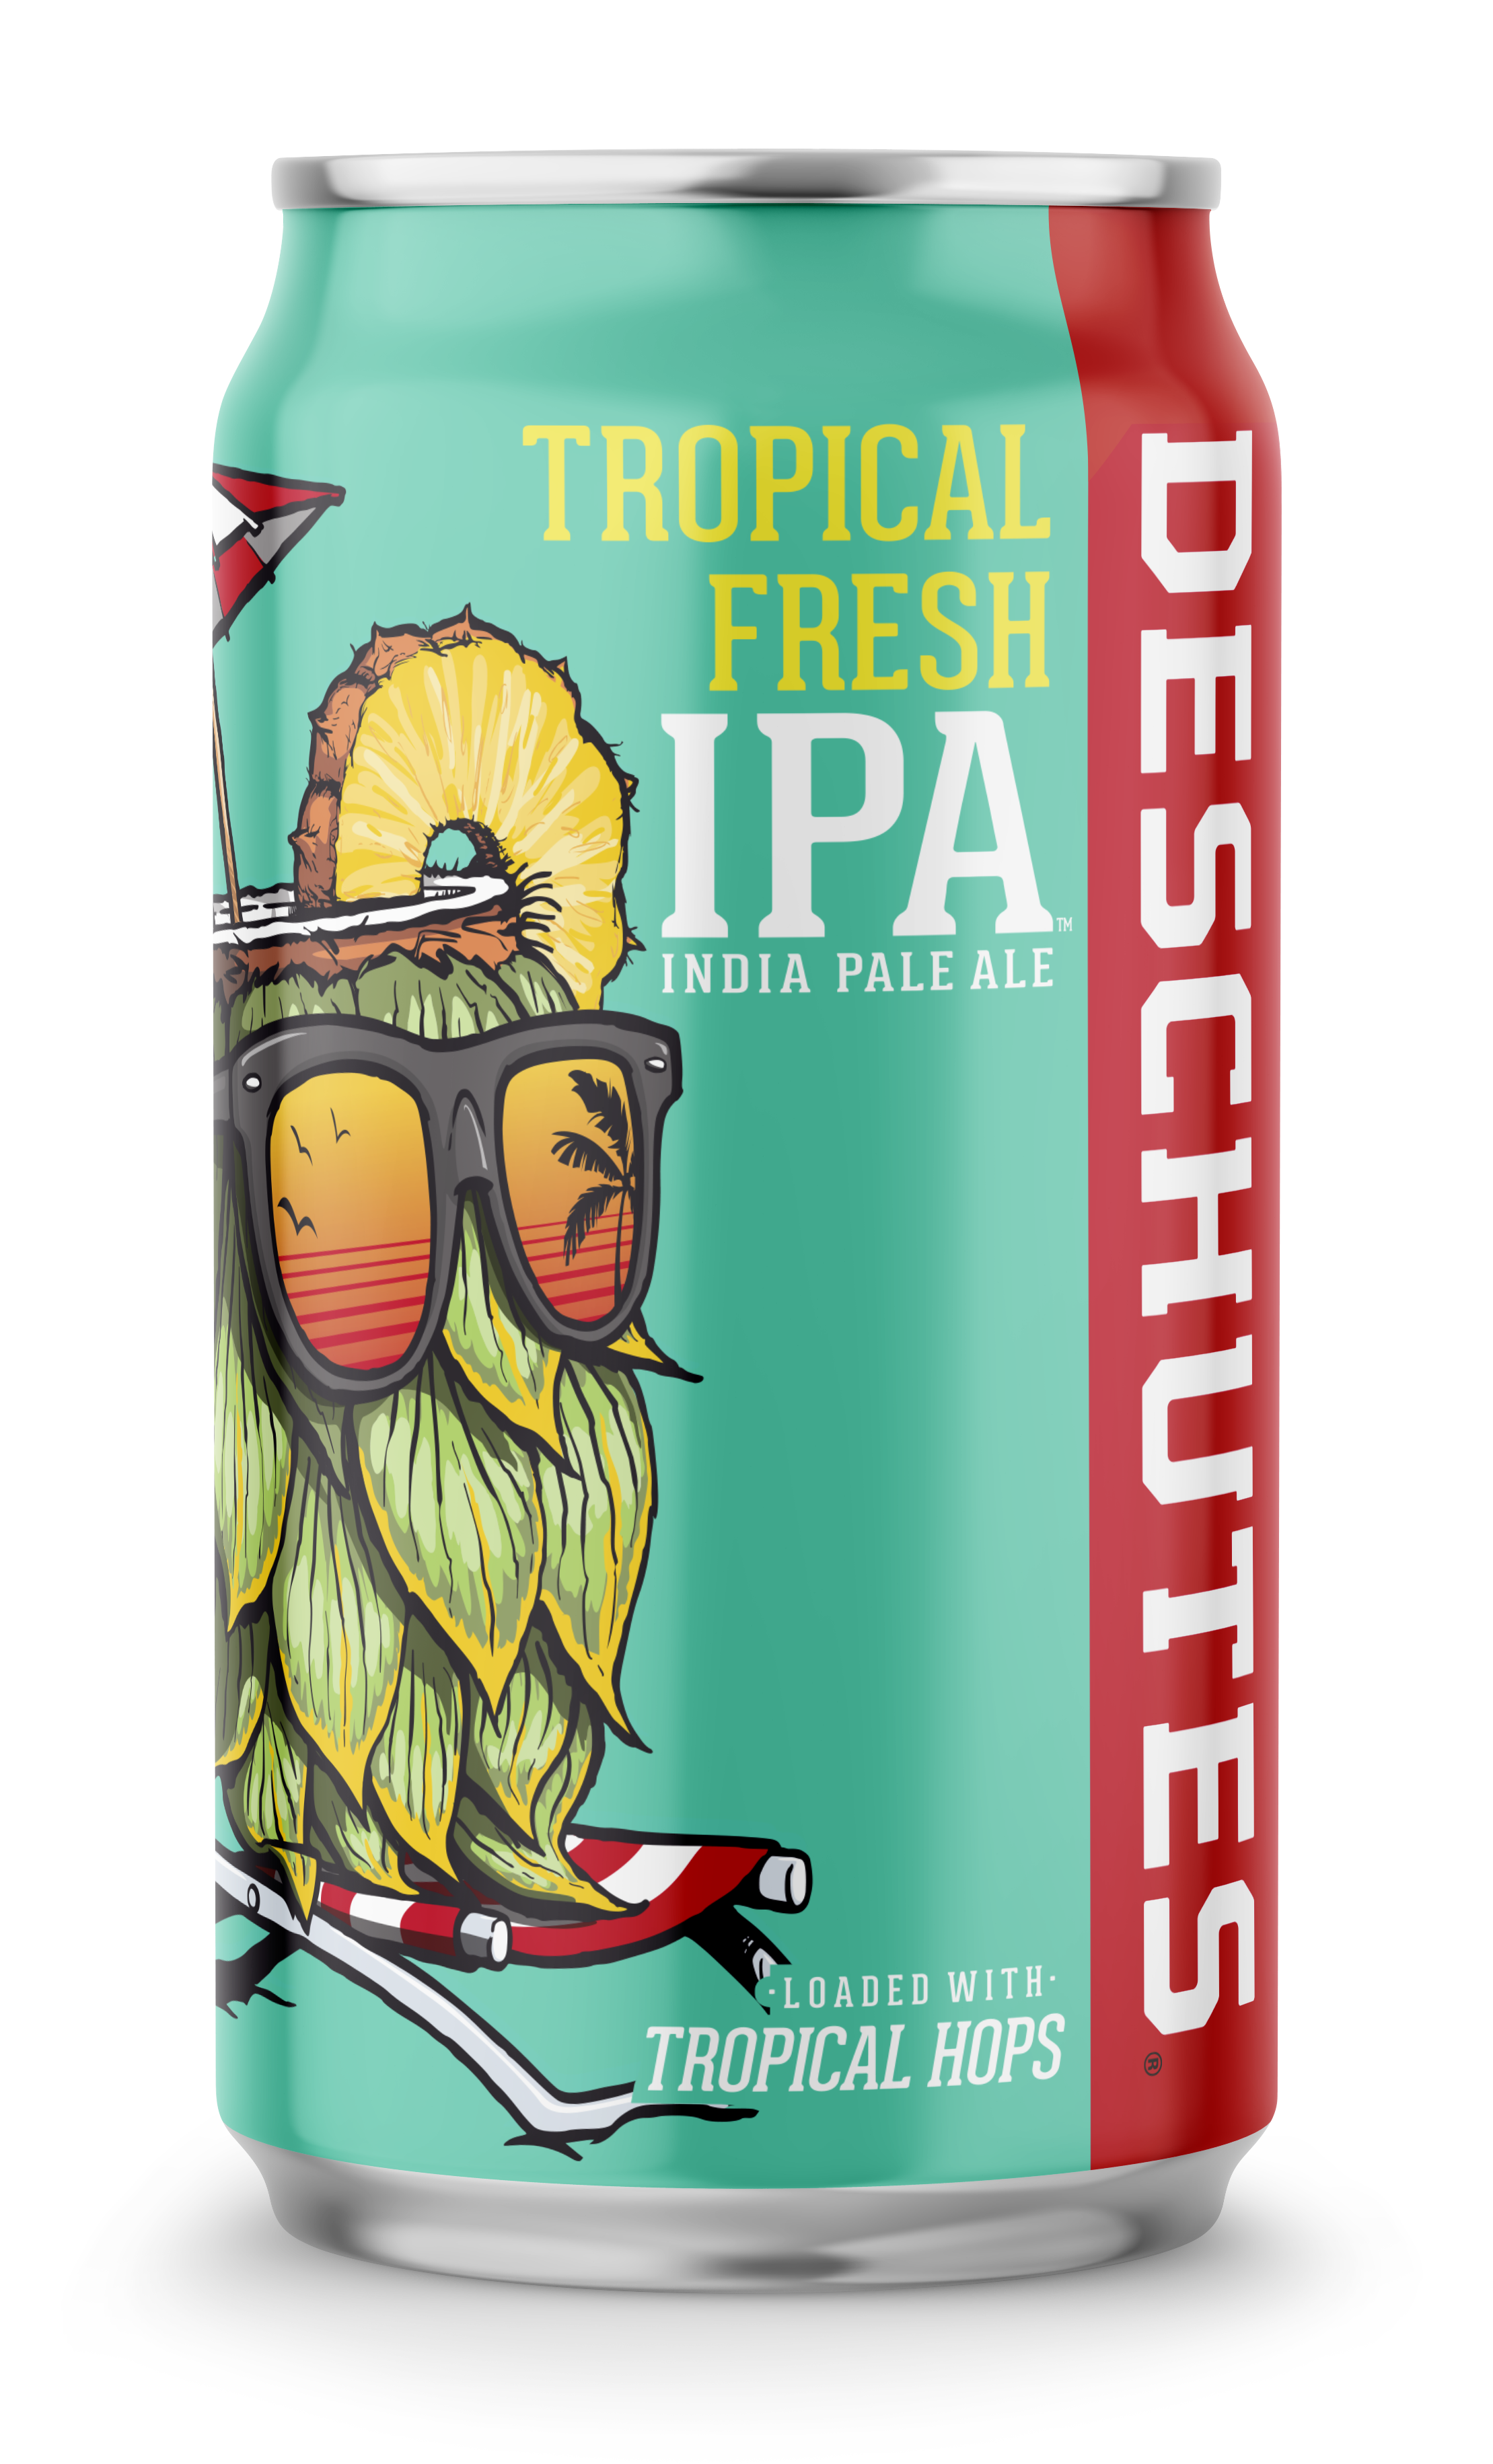 Deschutes_Can_TropicalFresh_Branded_Naked-2219x3663-ed5b775.png